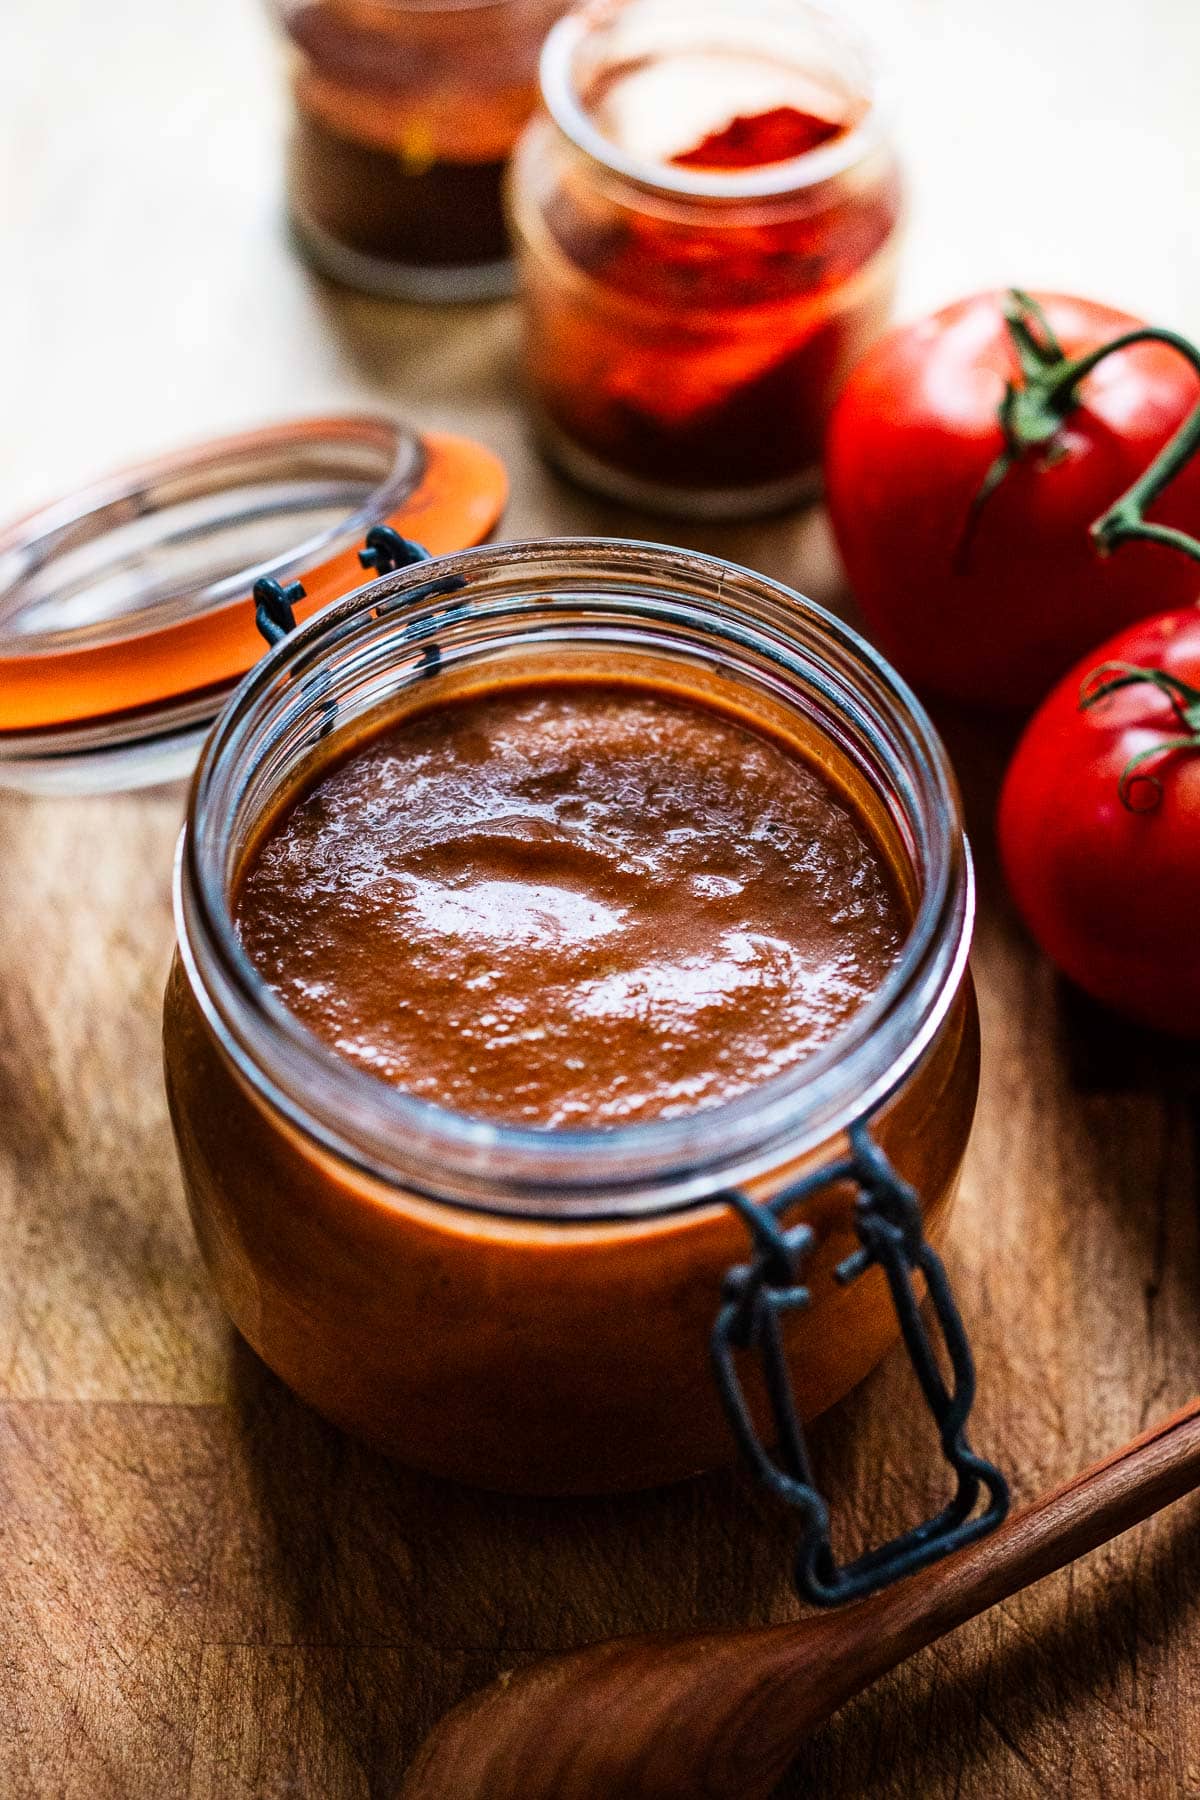 A quick, easy Enchilada Sauce Recipe using basic pantry ingredients and a blender. With no cooking required, this sauce comes together in five minutes flat! 